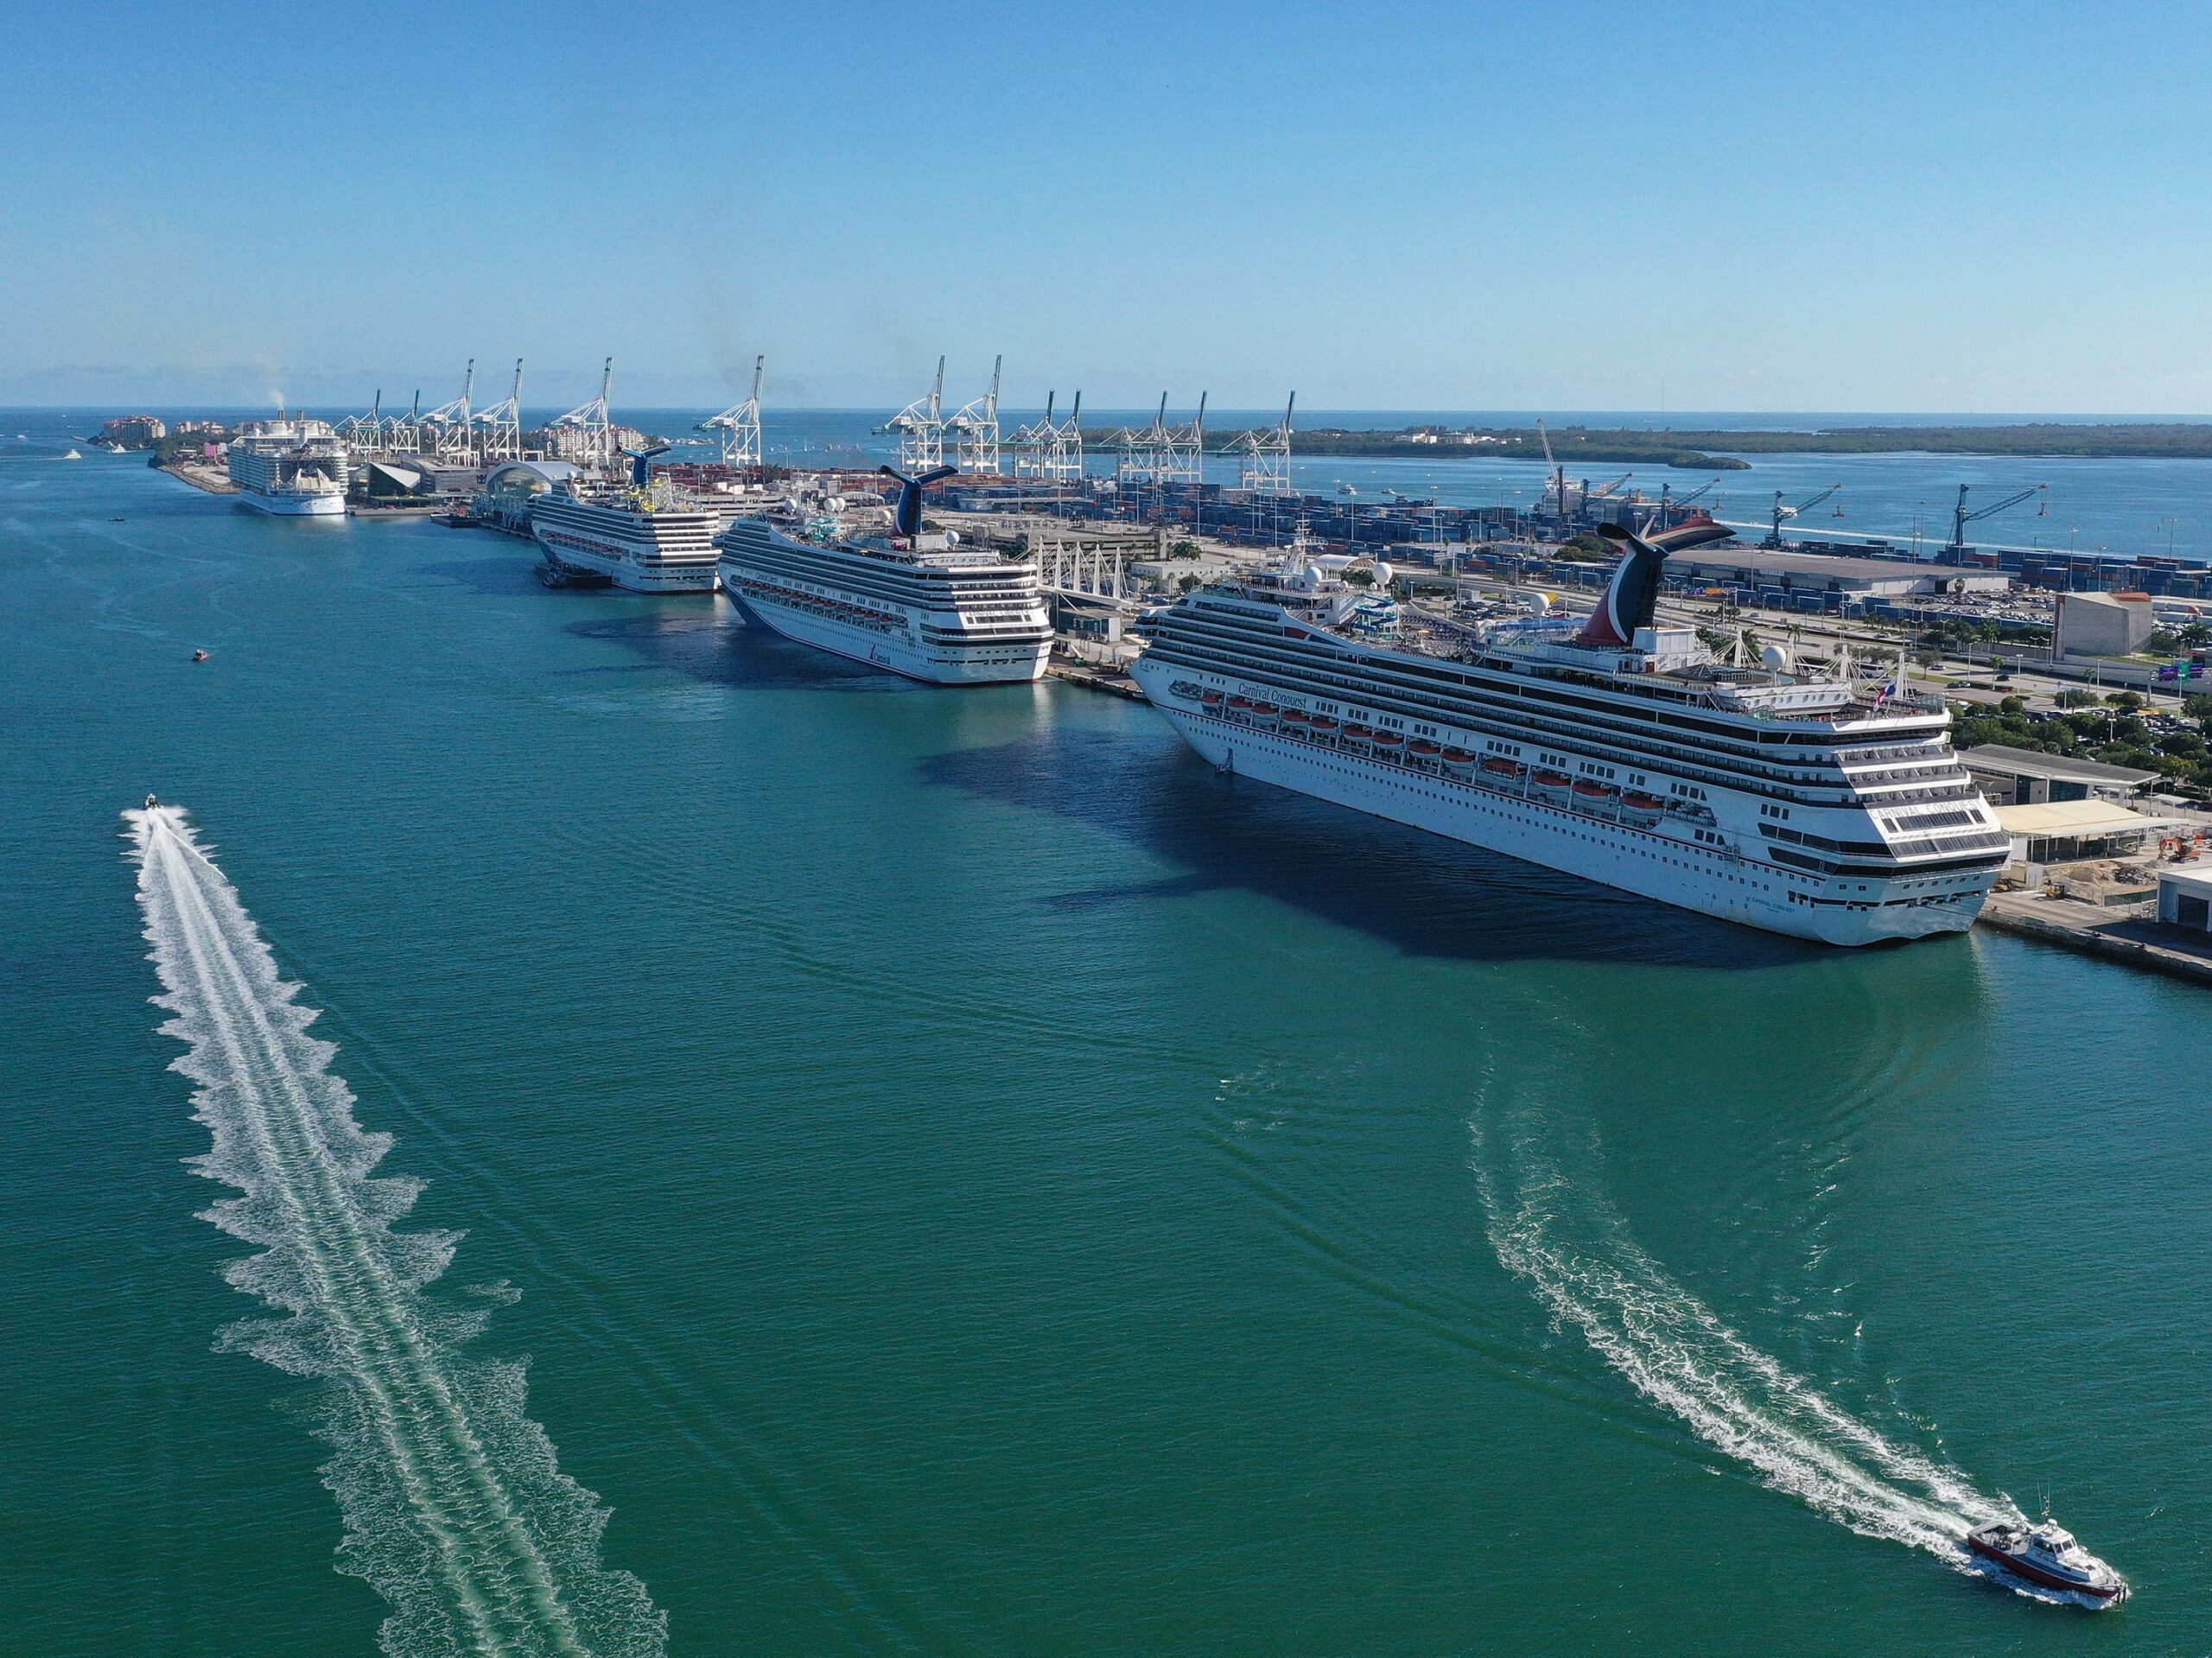 Cruise ships wait for people to embark before leaving Port of Miami on December 31, 2021 in Miami, Florida.